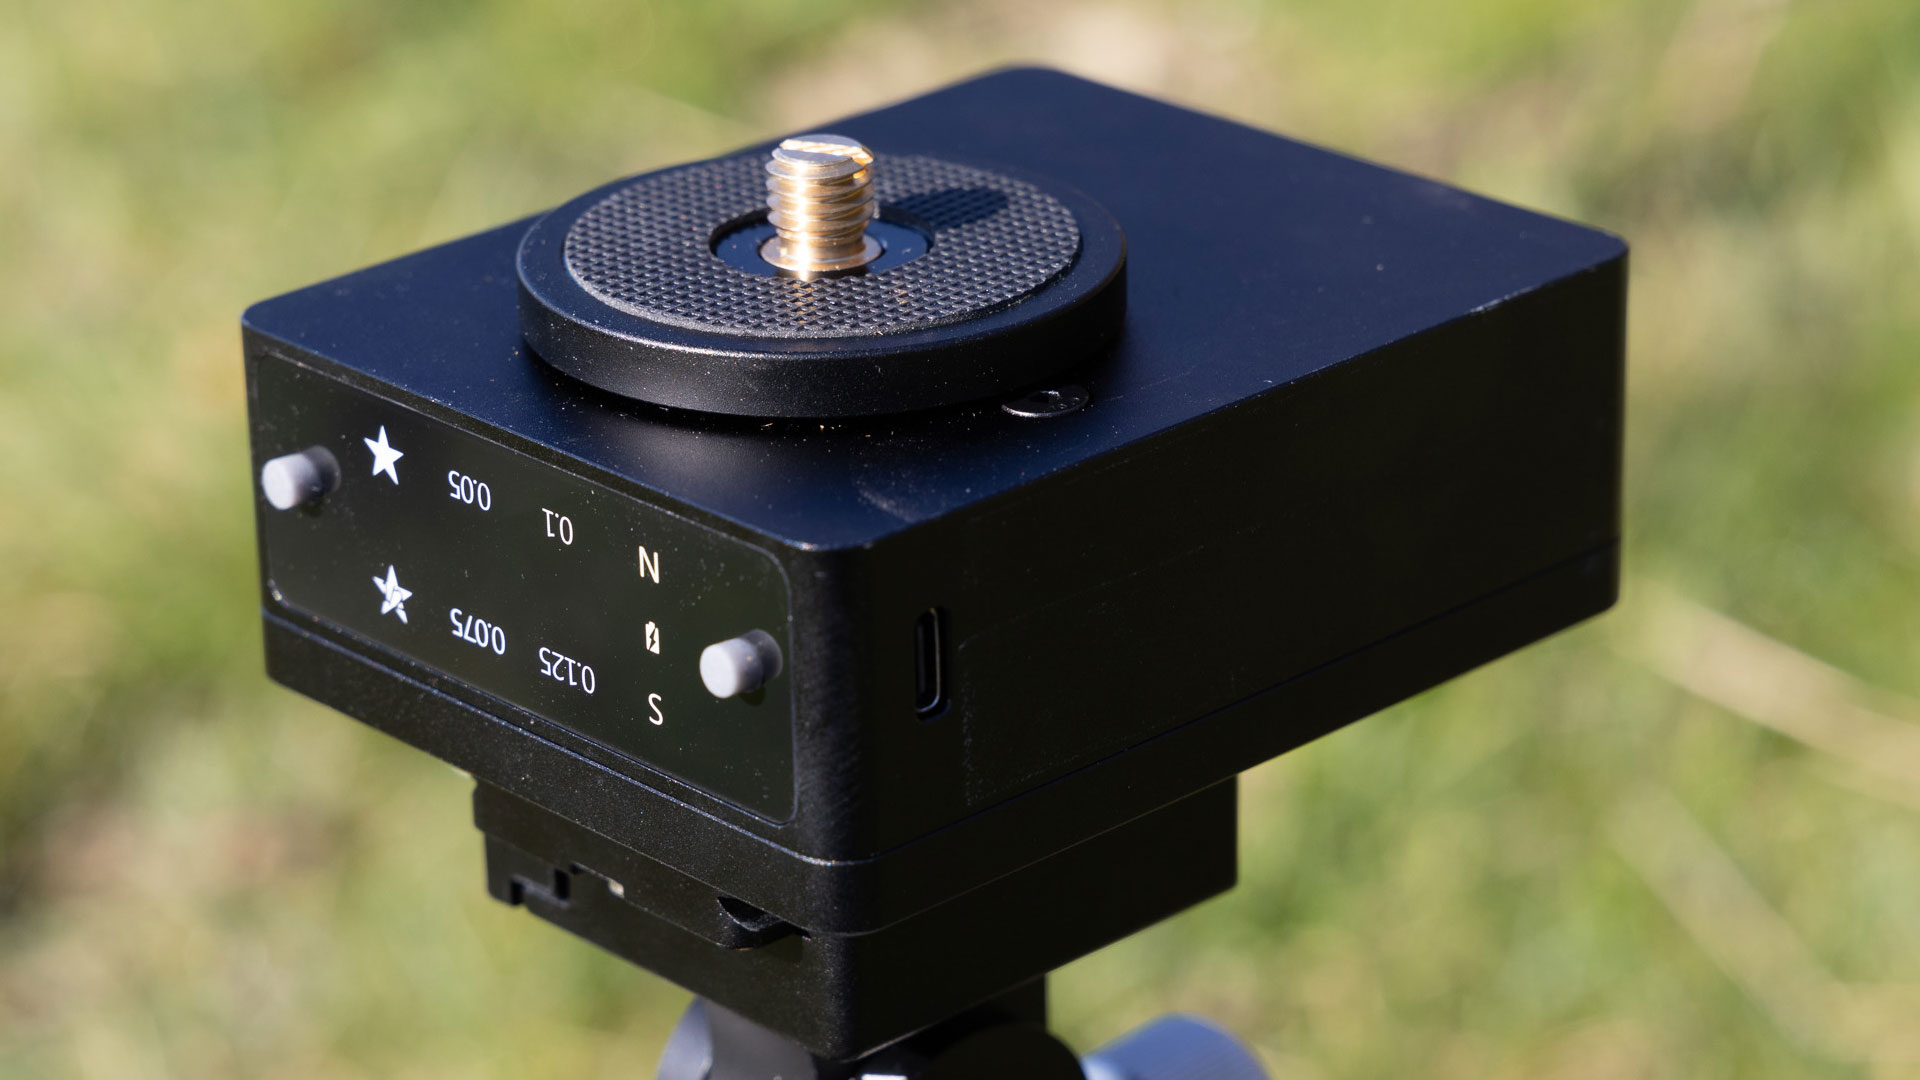 MoveShootMove Star Tracker review: image shows MoveShootMove Star Tracker